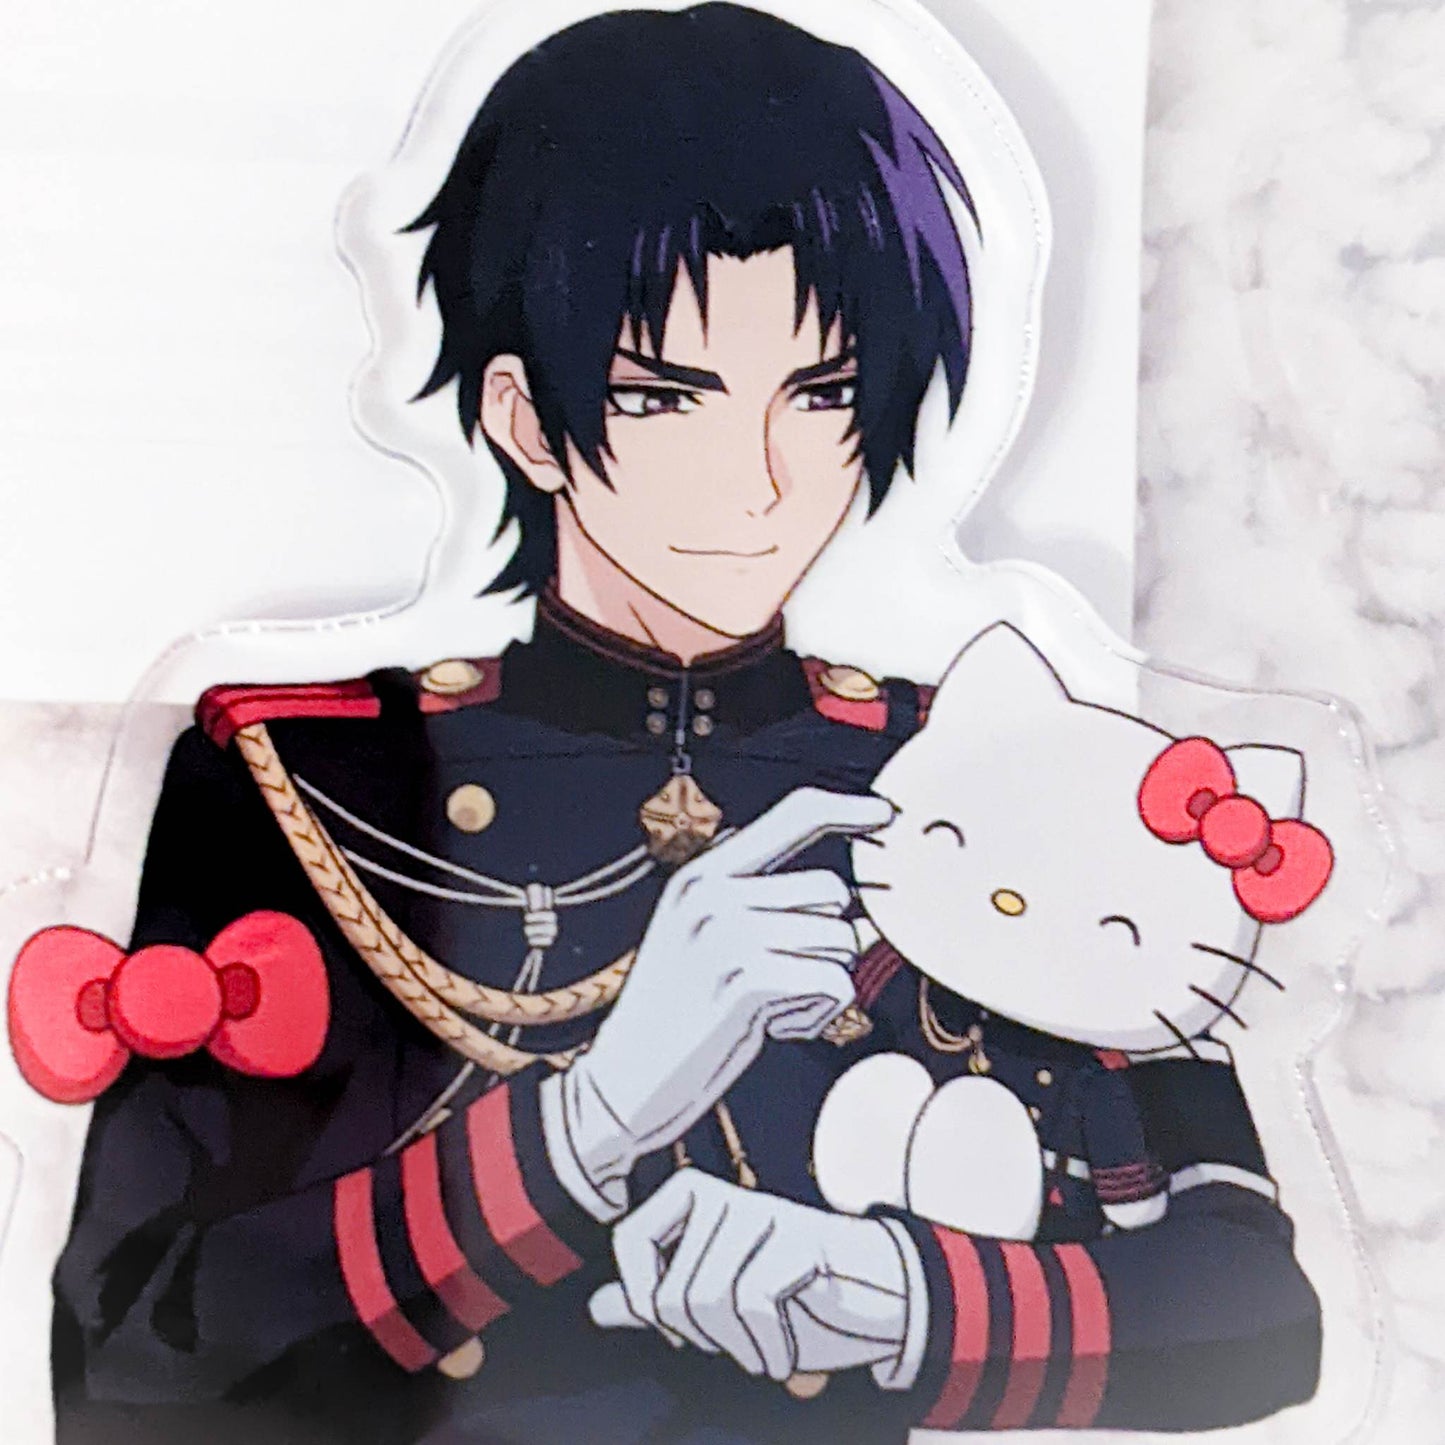 𝐸𝓁𝒾𝓈𝒶𝒷𝑒𝓉𝒽 on X: Fanart I made for my best friend who is really  into Seraph of the end - especially into Guren Ichinose ✨   / X